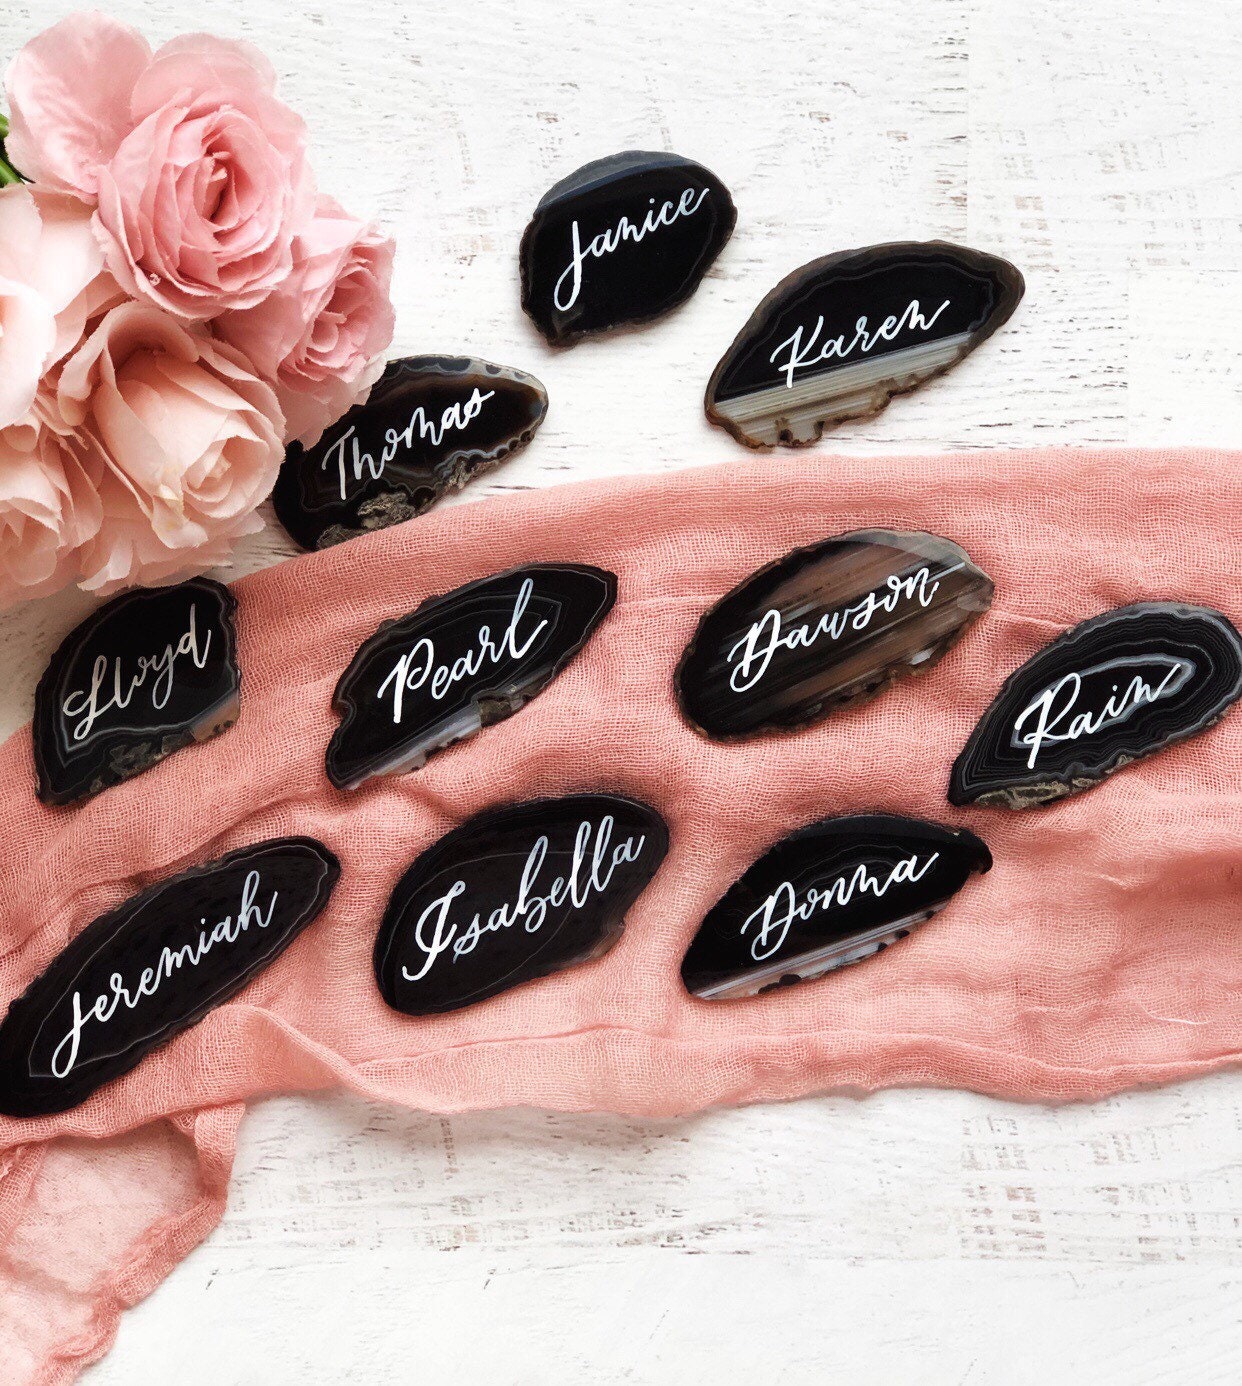 2.5" - 3" Black Agate Slice Calligraphy Name Place Cards | Agate Calligraphy Name Cards